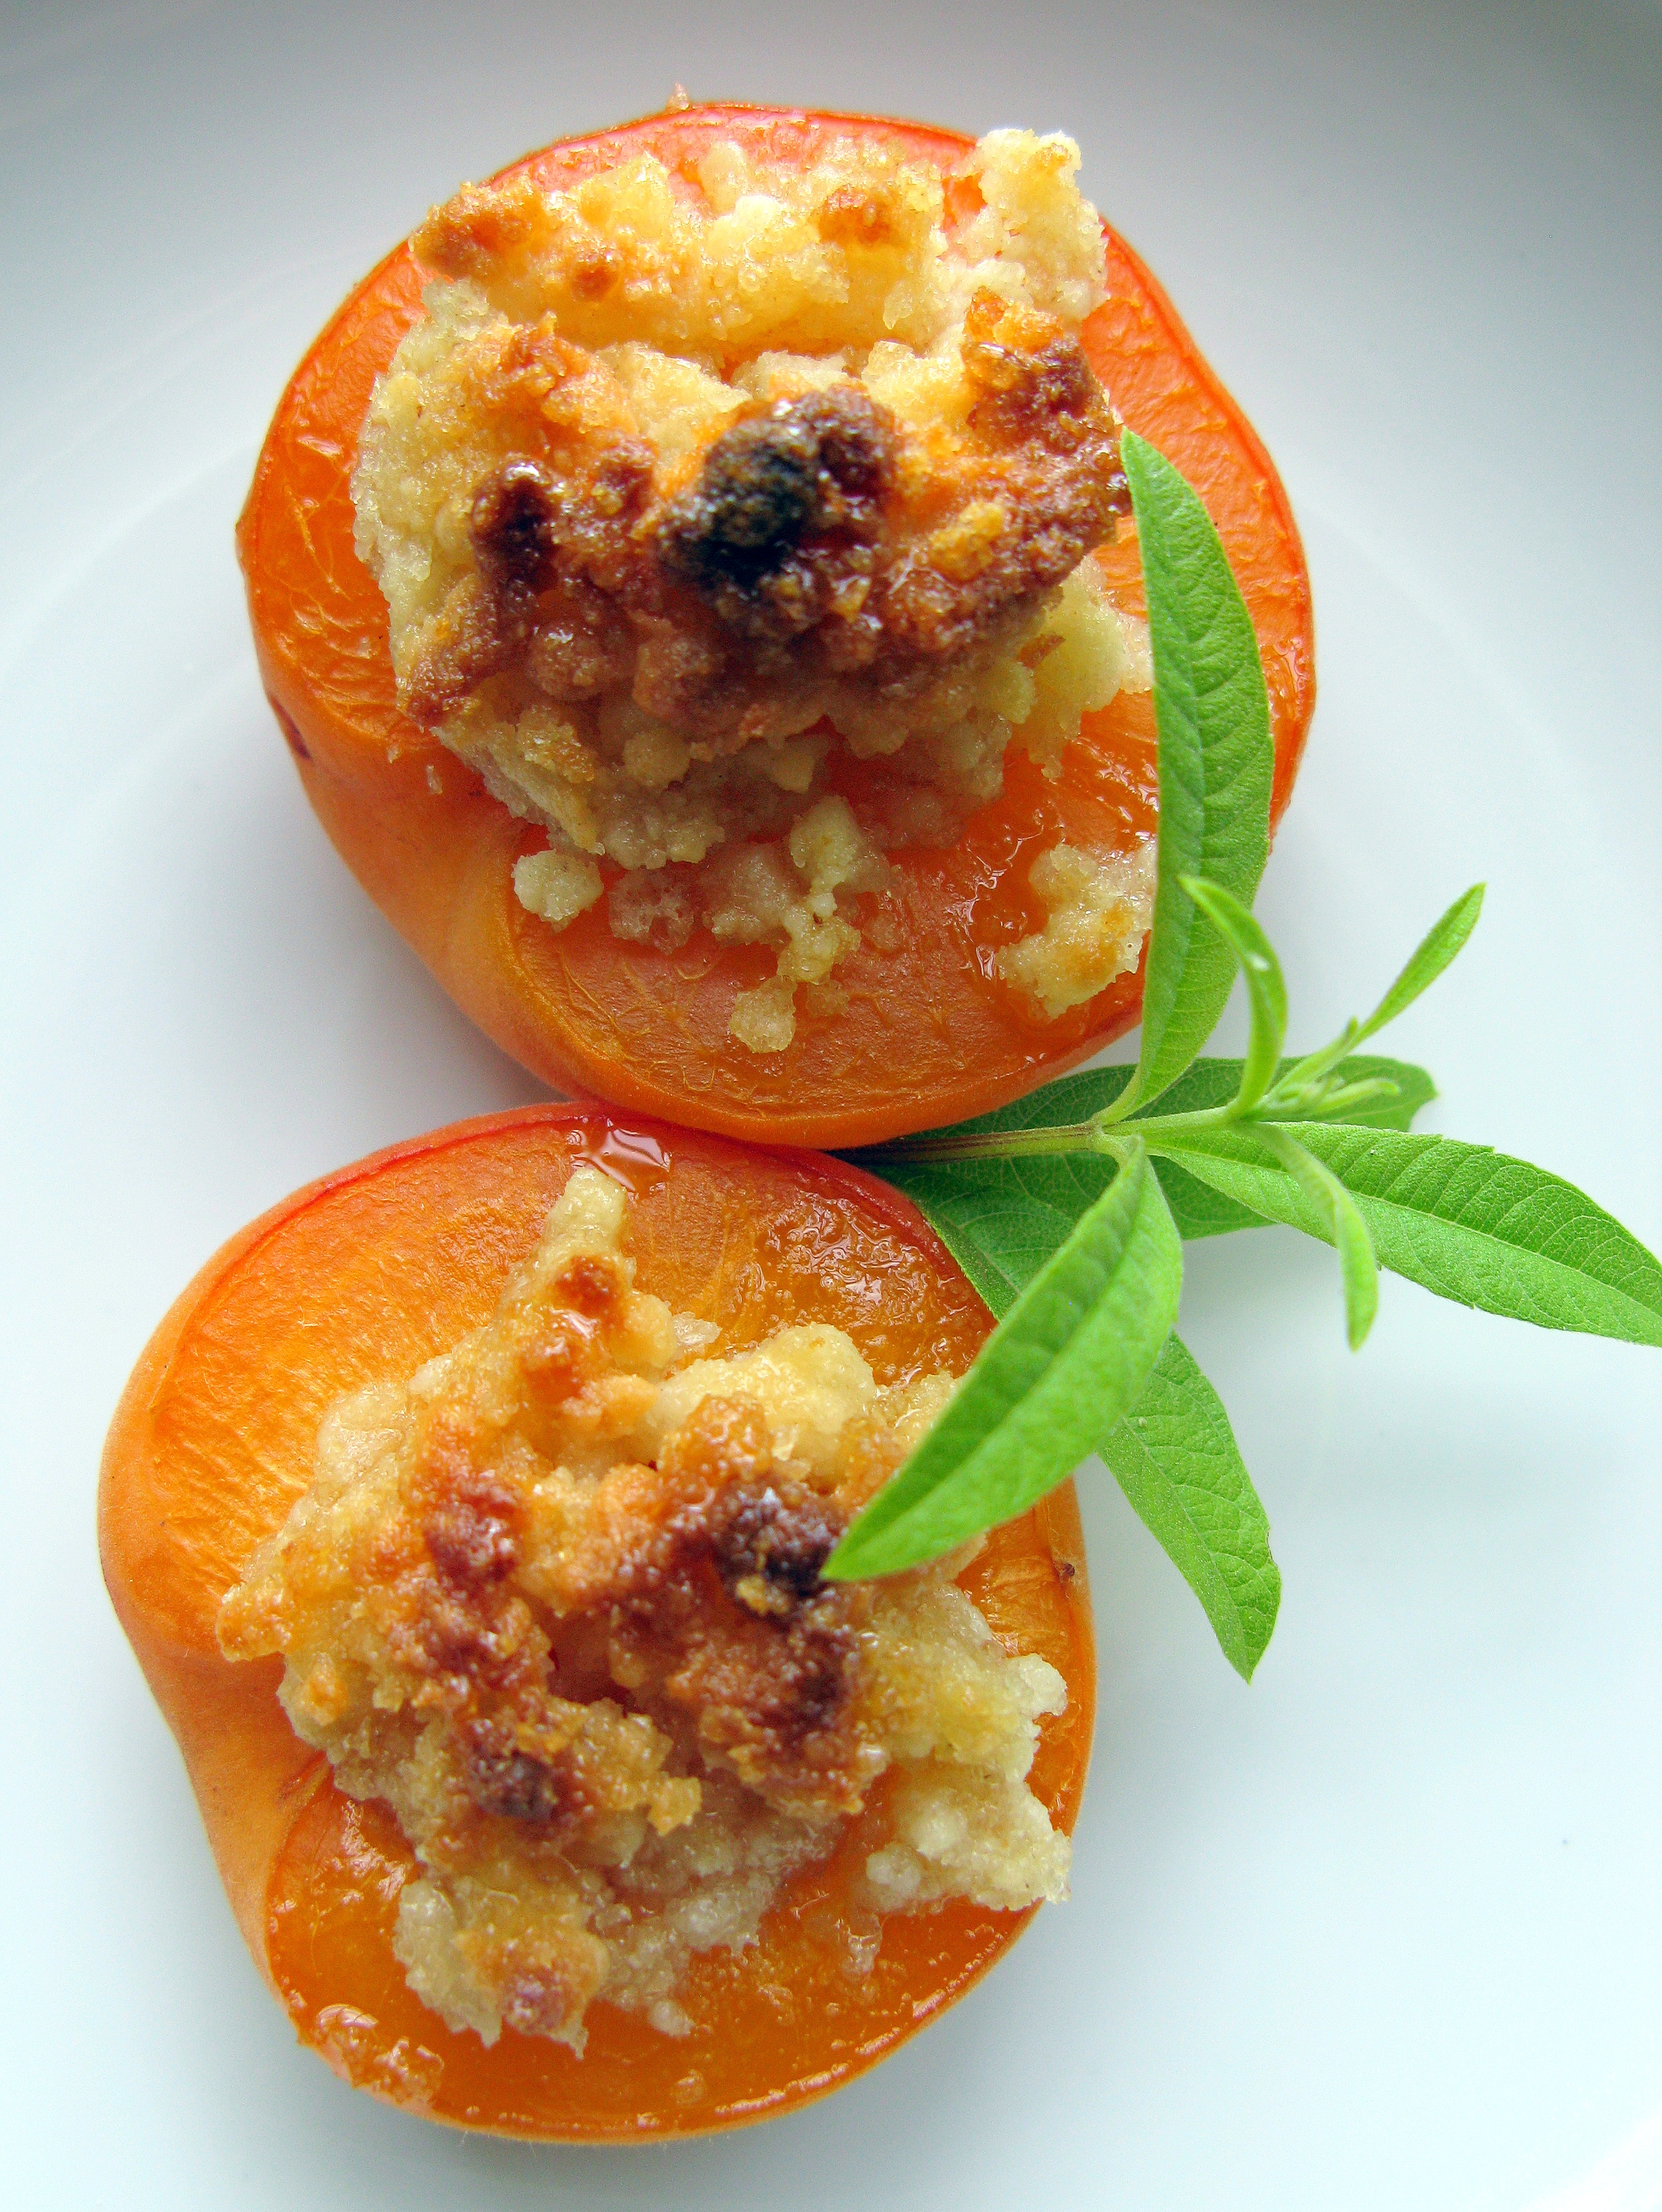 Summer Apricots, Baked with a Sweet Almond Filling